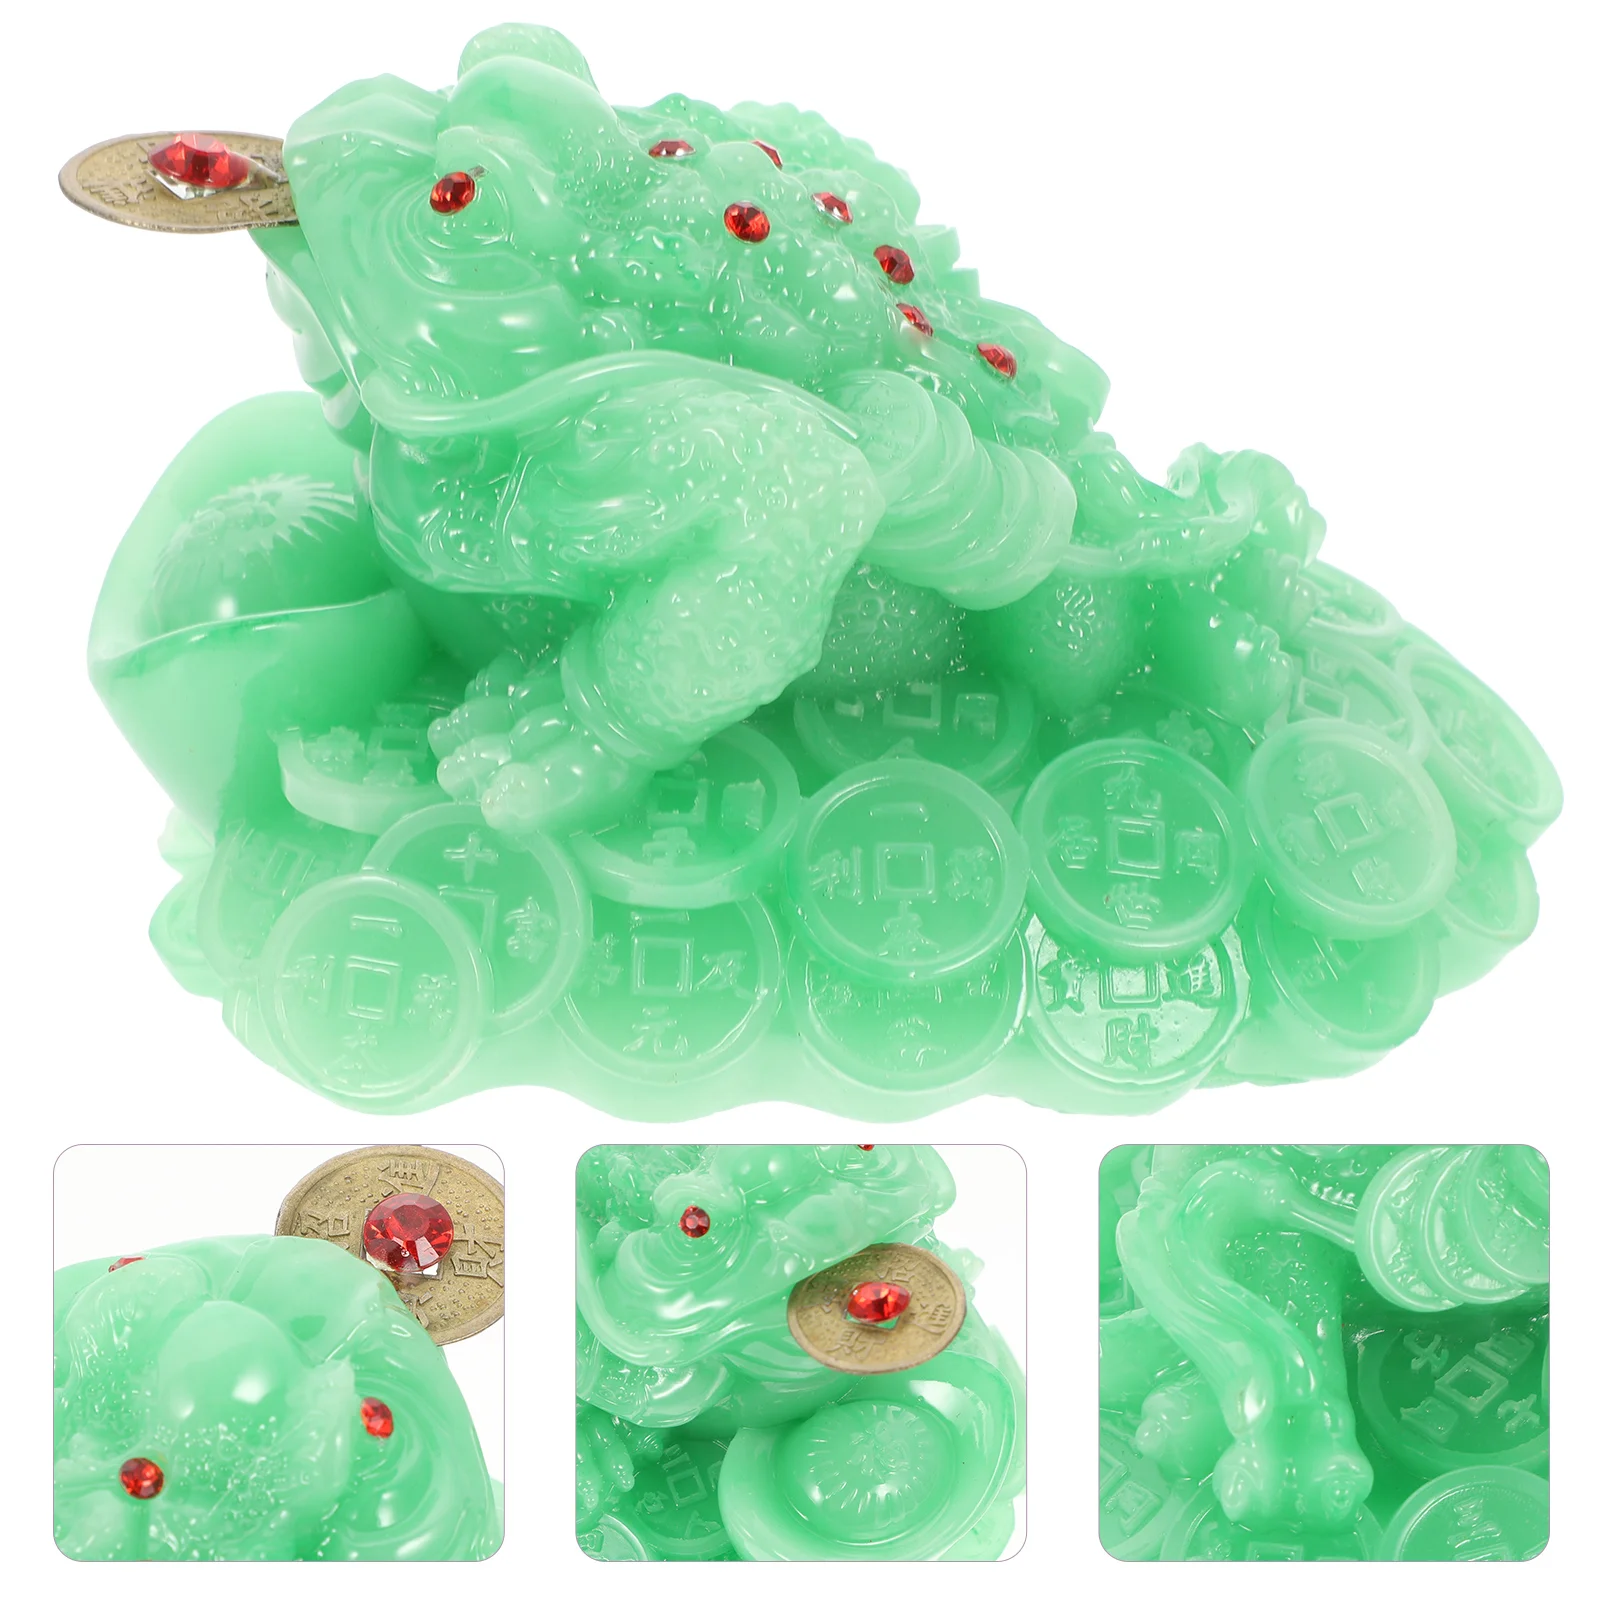 

Toad Wealth Frog Statue Money Figurine Resin Decor Sculpture Ornament Feng Chinese Shui Coin Three Legged Home Desktop Frogs